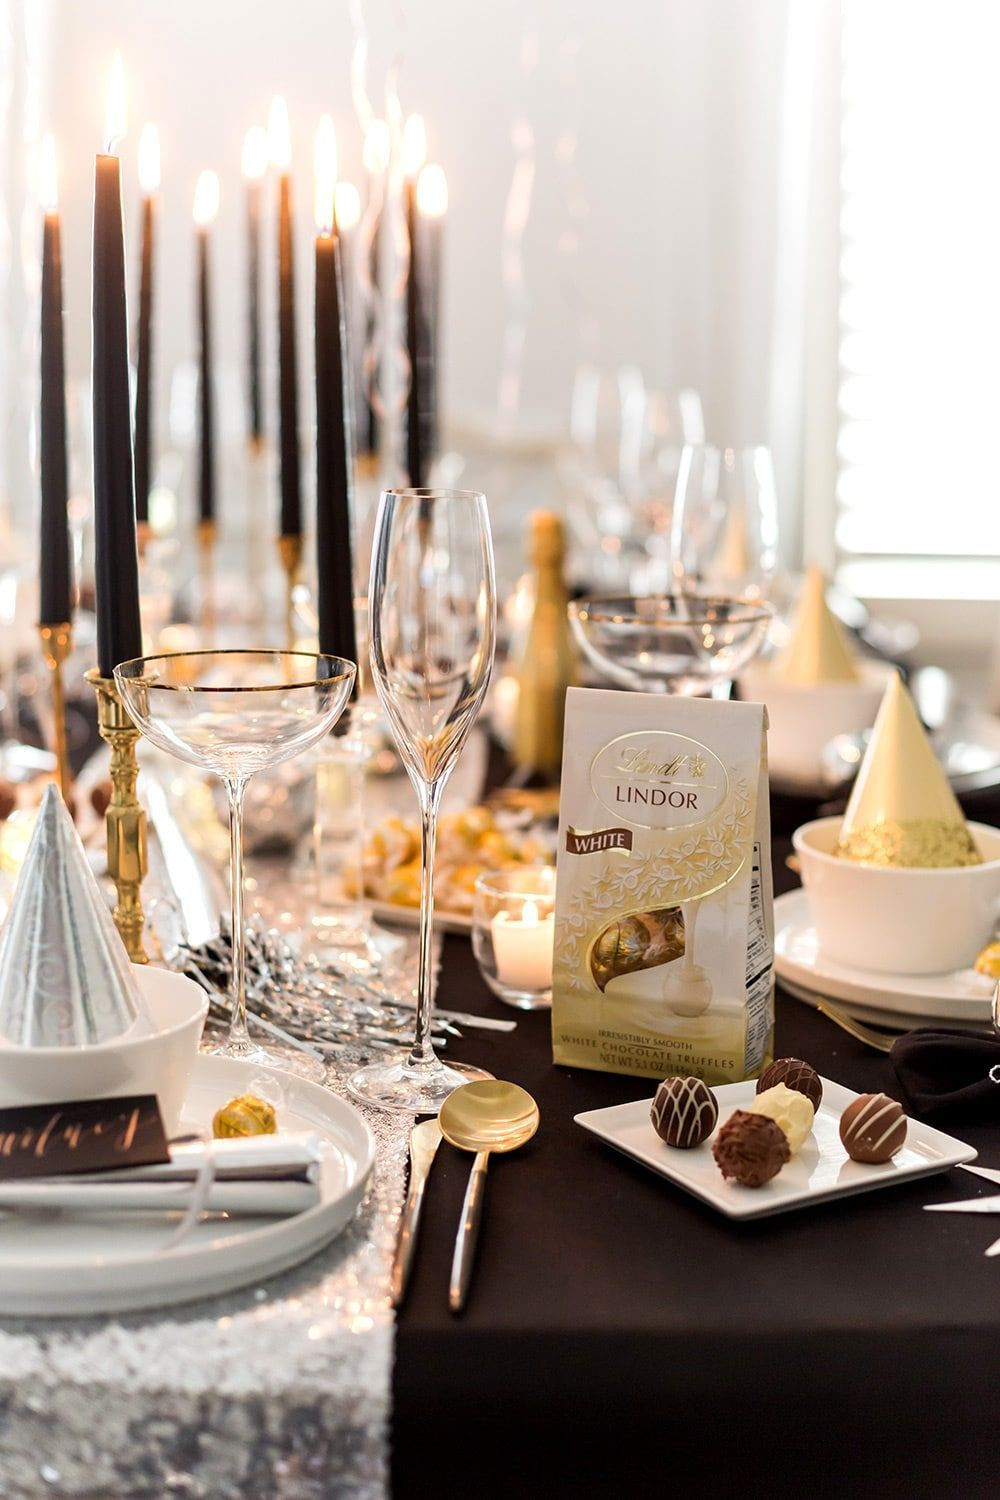 New Year'S Eve Dinner Party Menu Ideas
 New Year s Eve Dinner Party with Lindt Chocolate